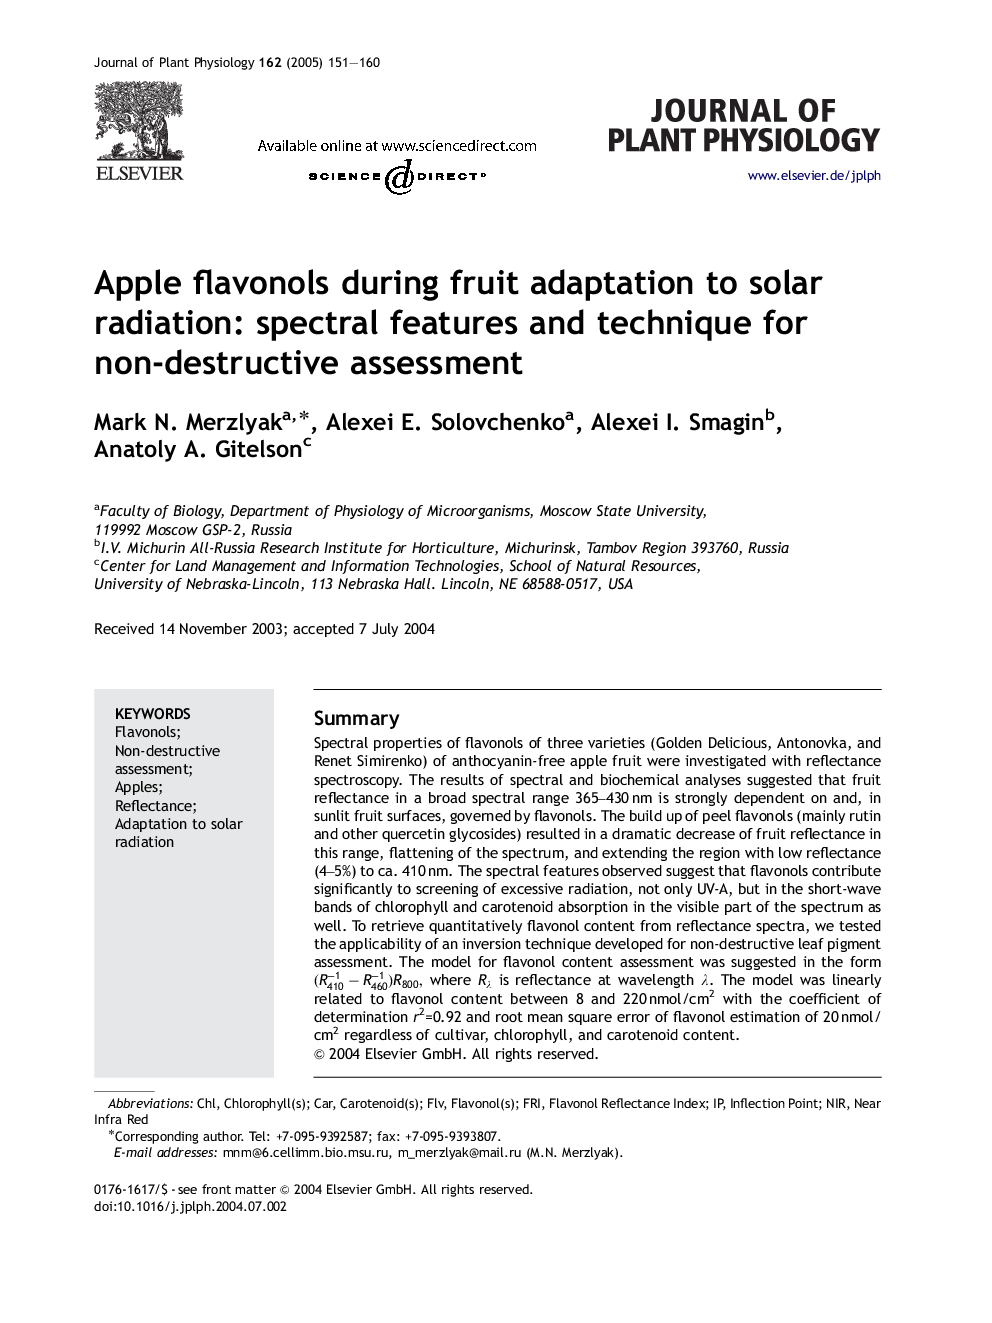 Apple flavonols during fruit adaptation to solar radiation: spectral features and technique for non-destructive assessment